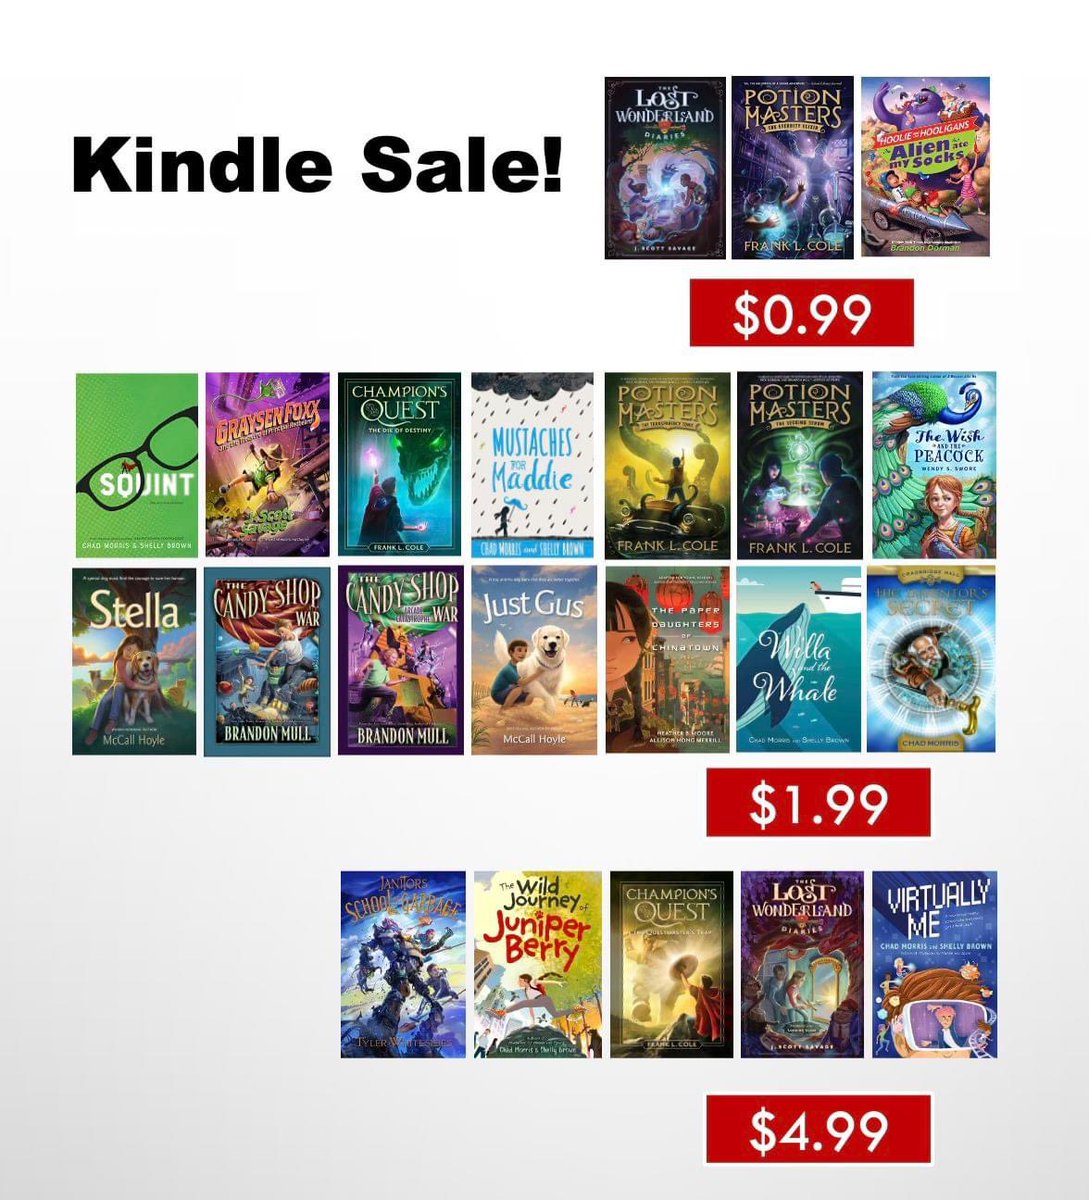 Pretty great kindle sale going on. I think it goes through Monday, Nov 27. #mglit #christmas #books #kindle